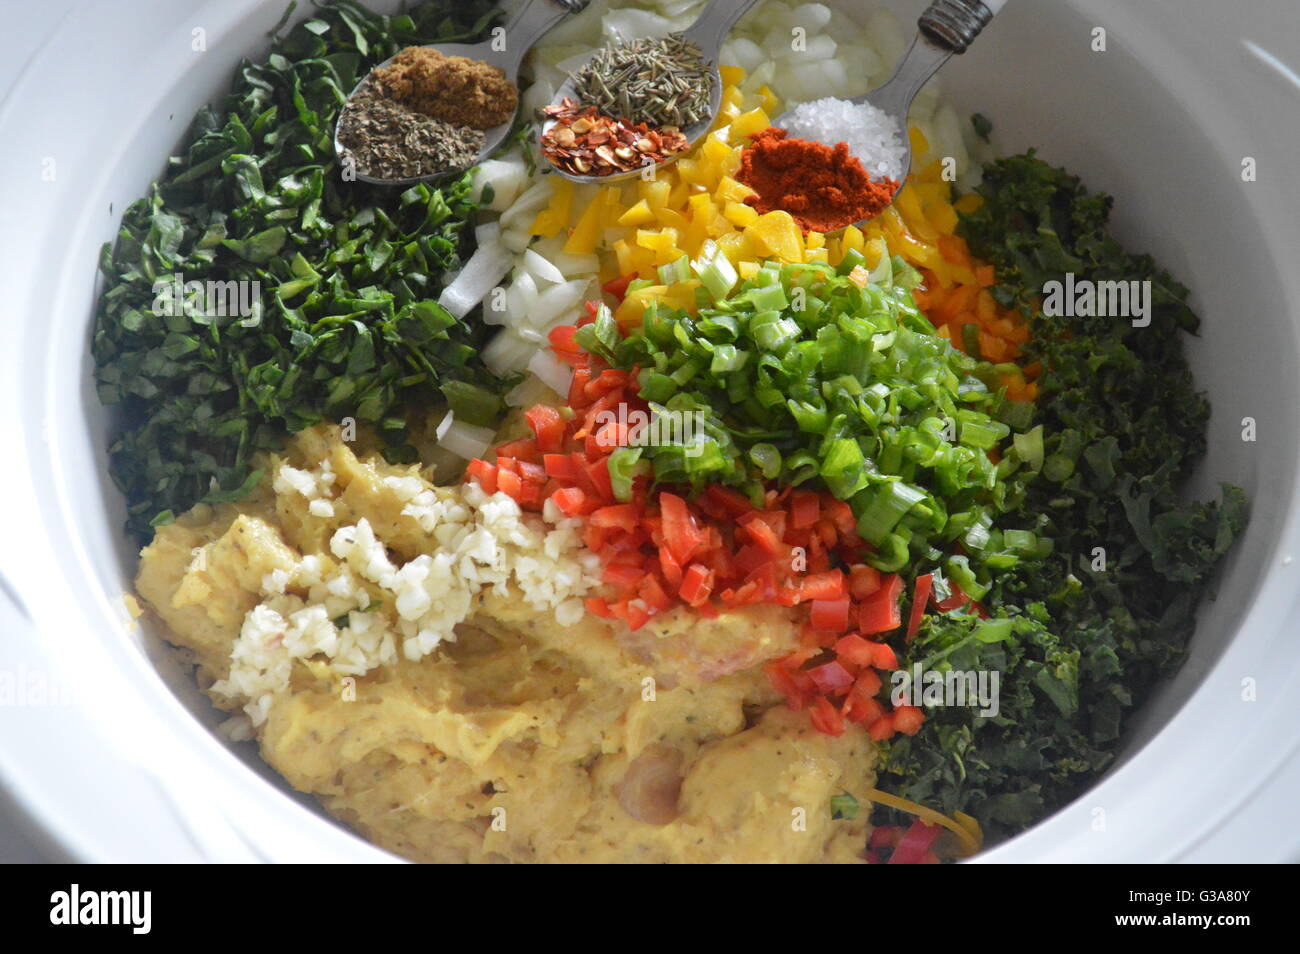 Fresh ingredients mixed in a bowl Stock Photo